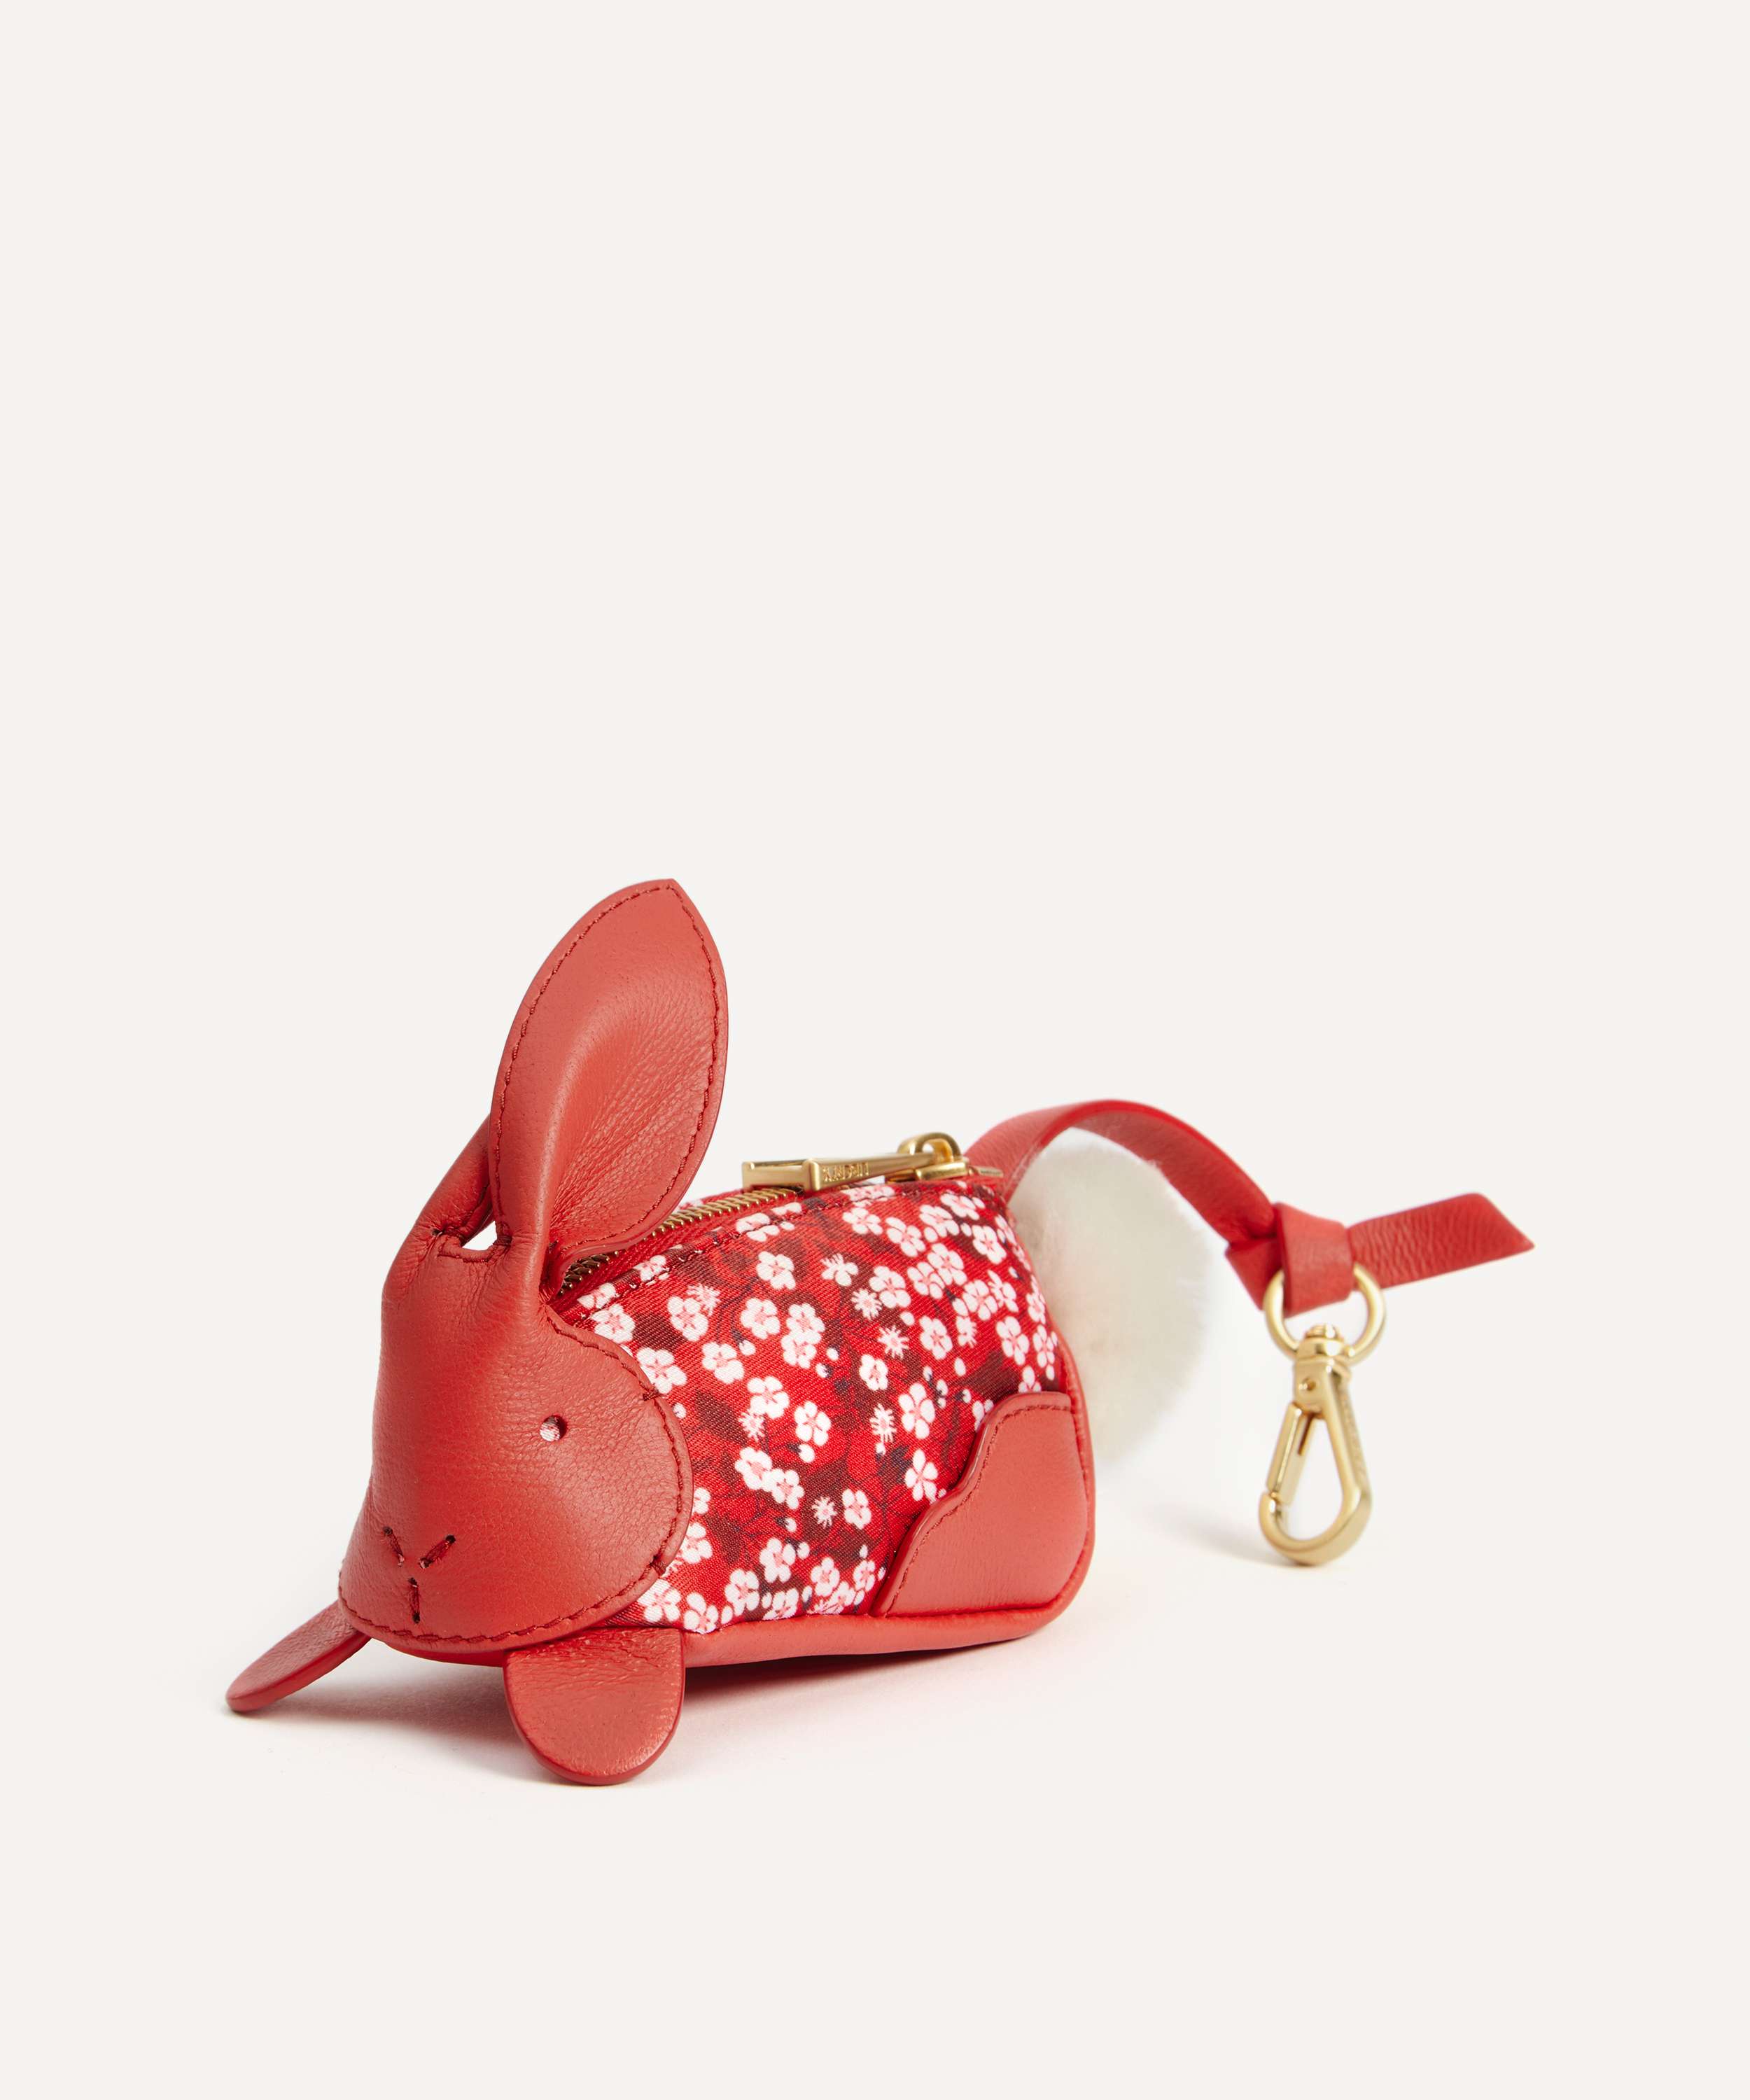 Louis Vuitton curates chic Lunar New Year gifts for collection